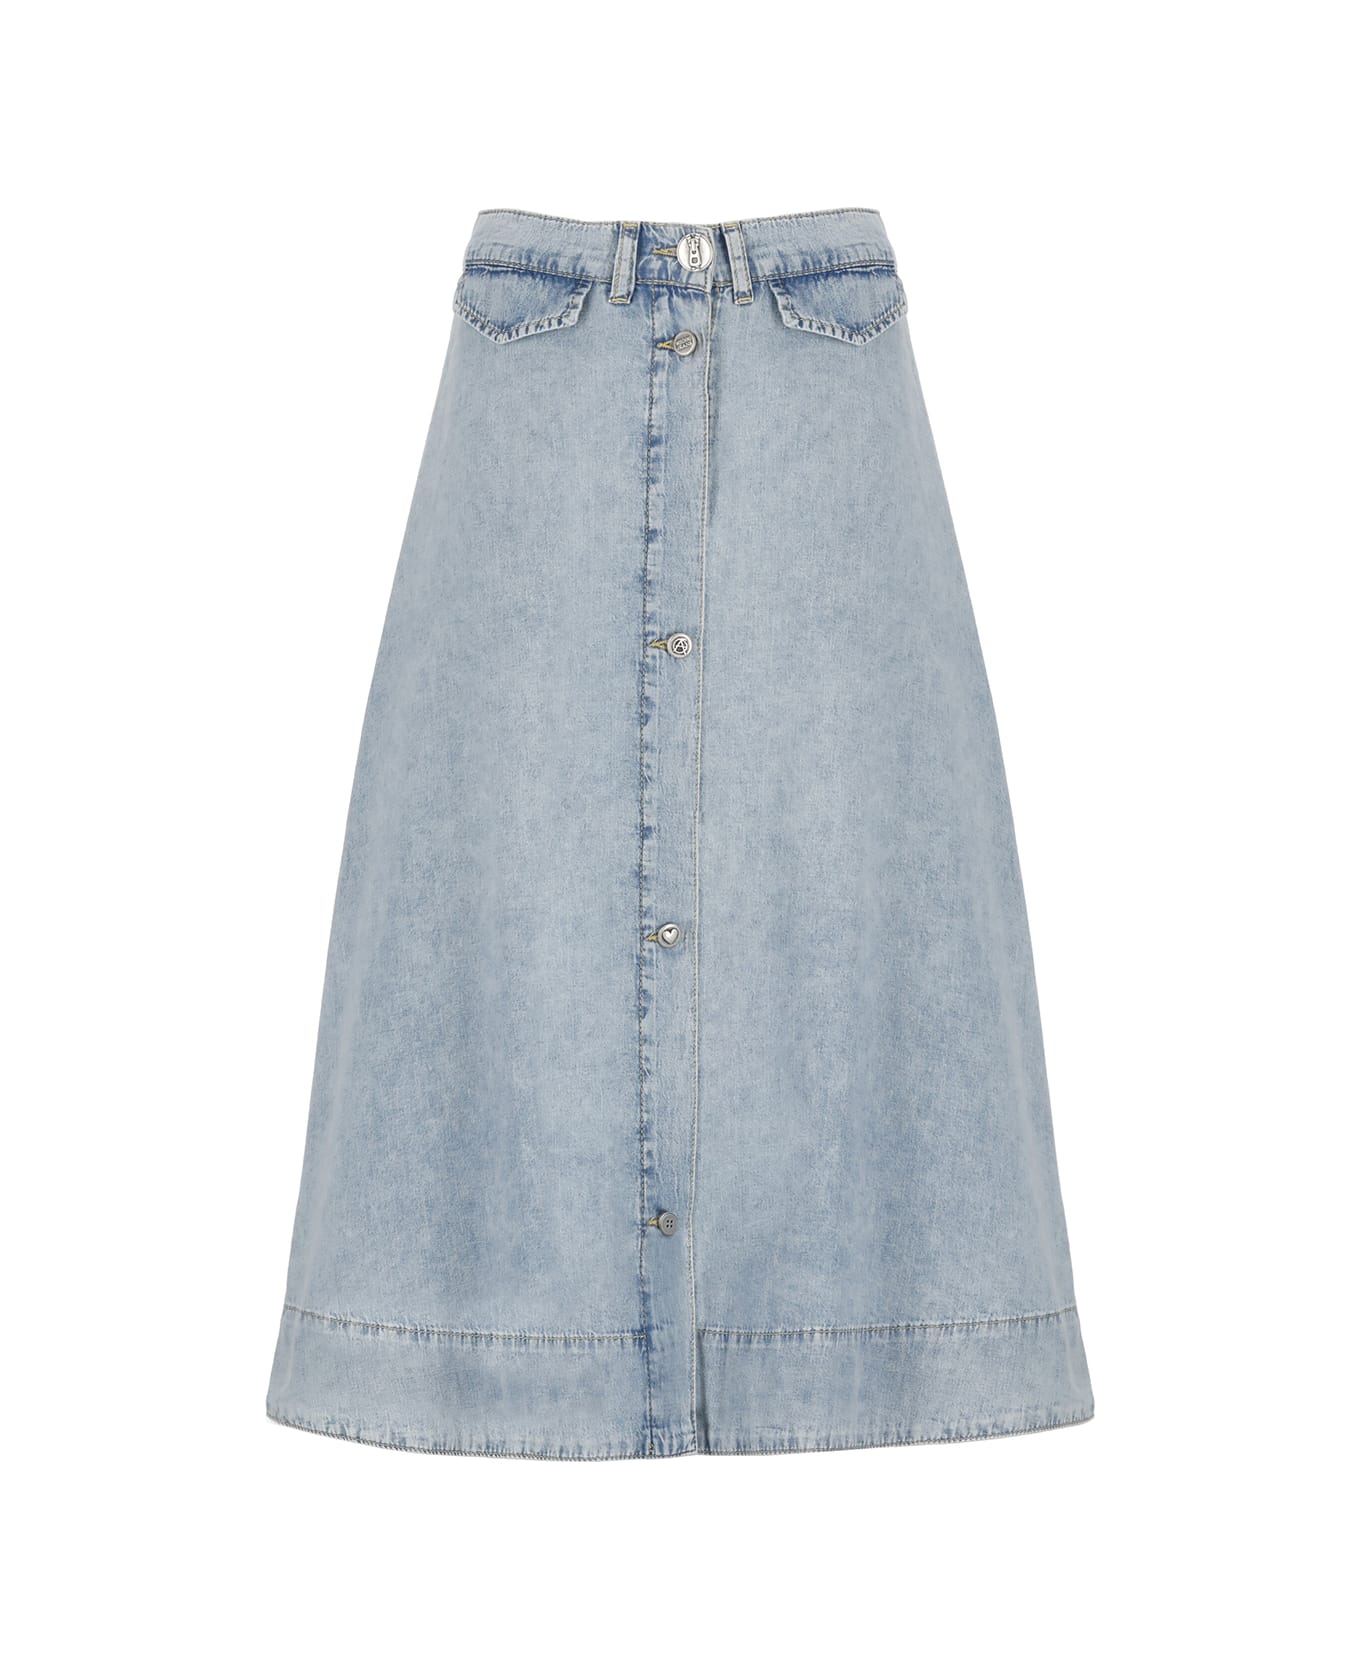 M05CH1N0 Jeans Cotton Skirt - Stone Washed